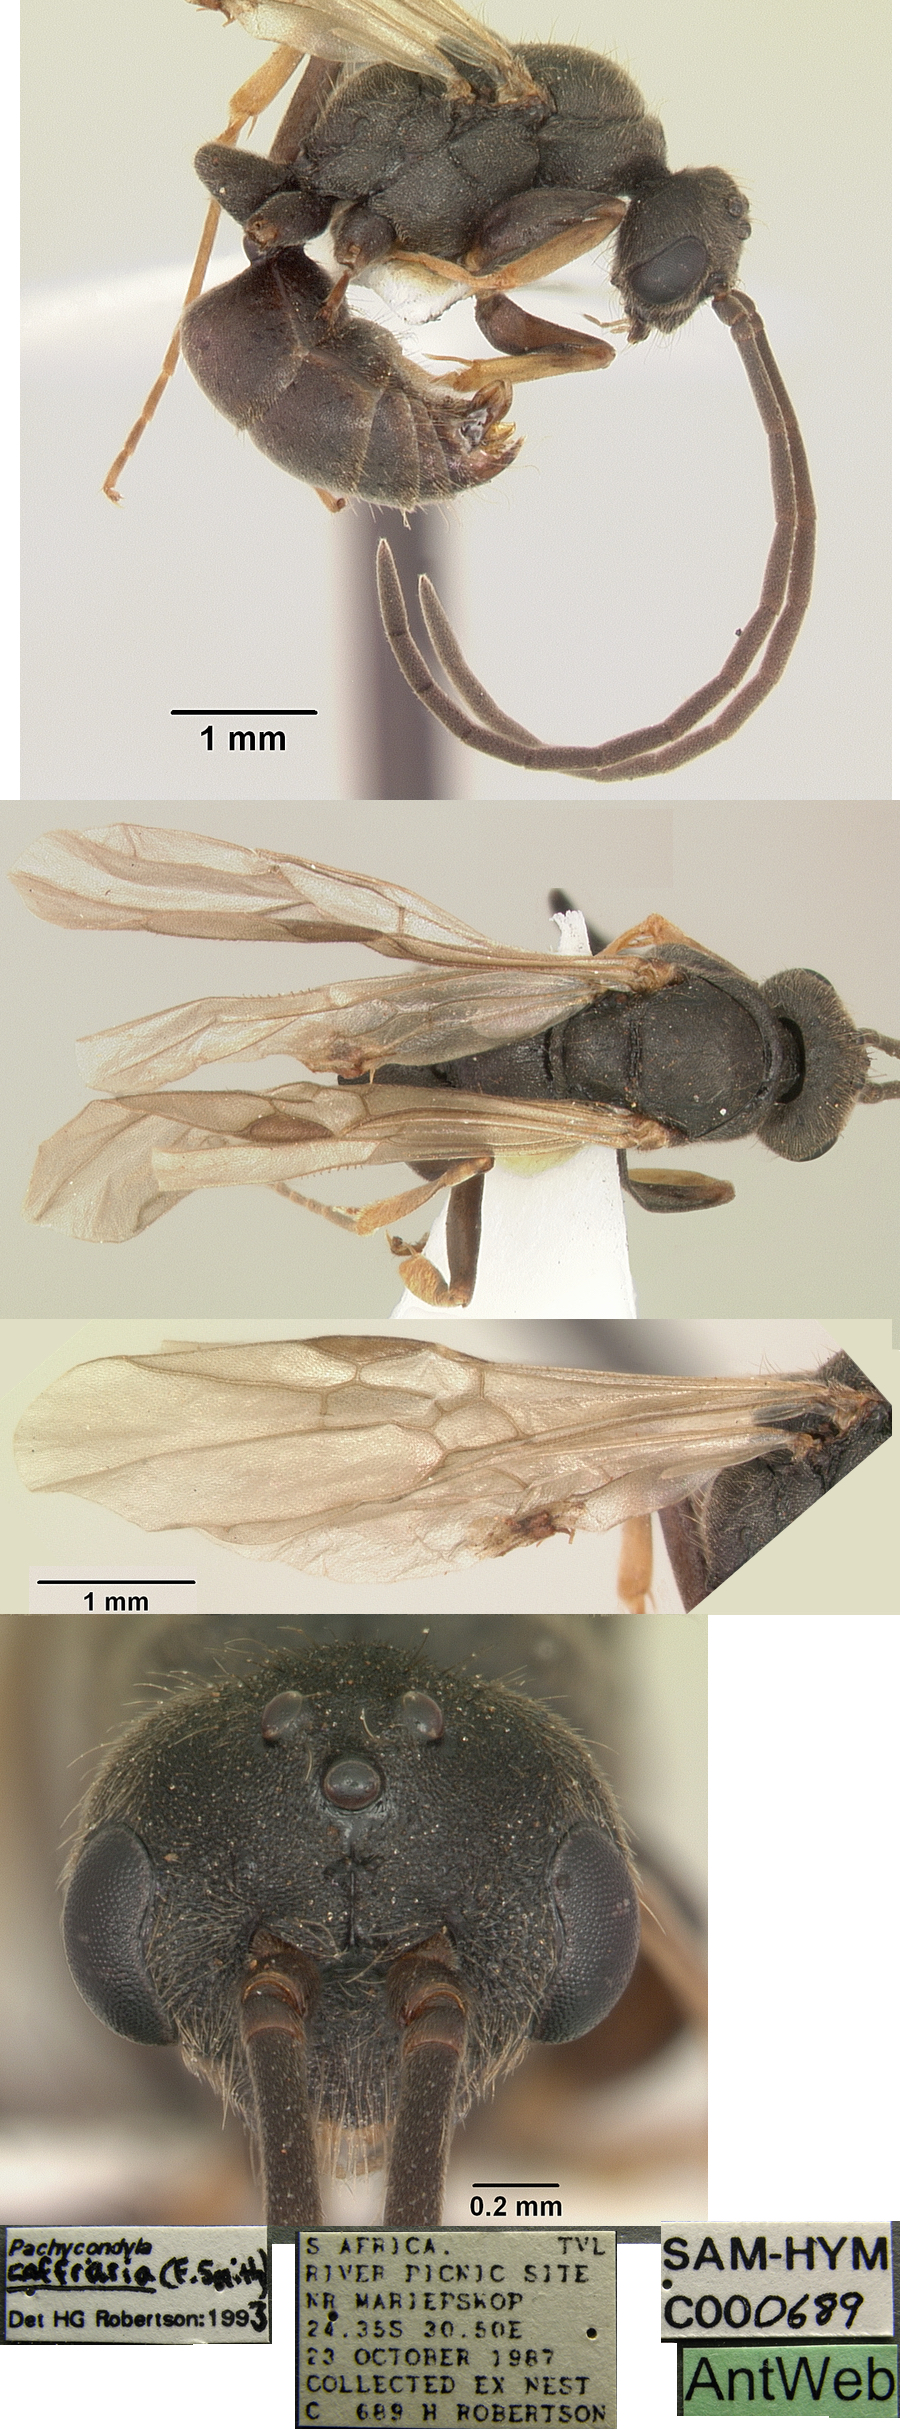 Pachycondyla caffraria male